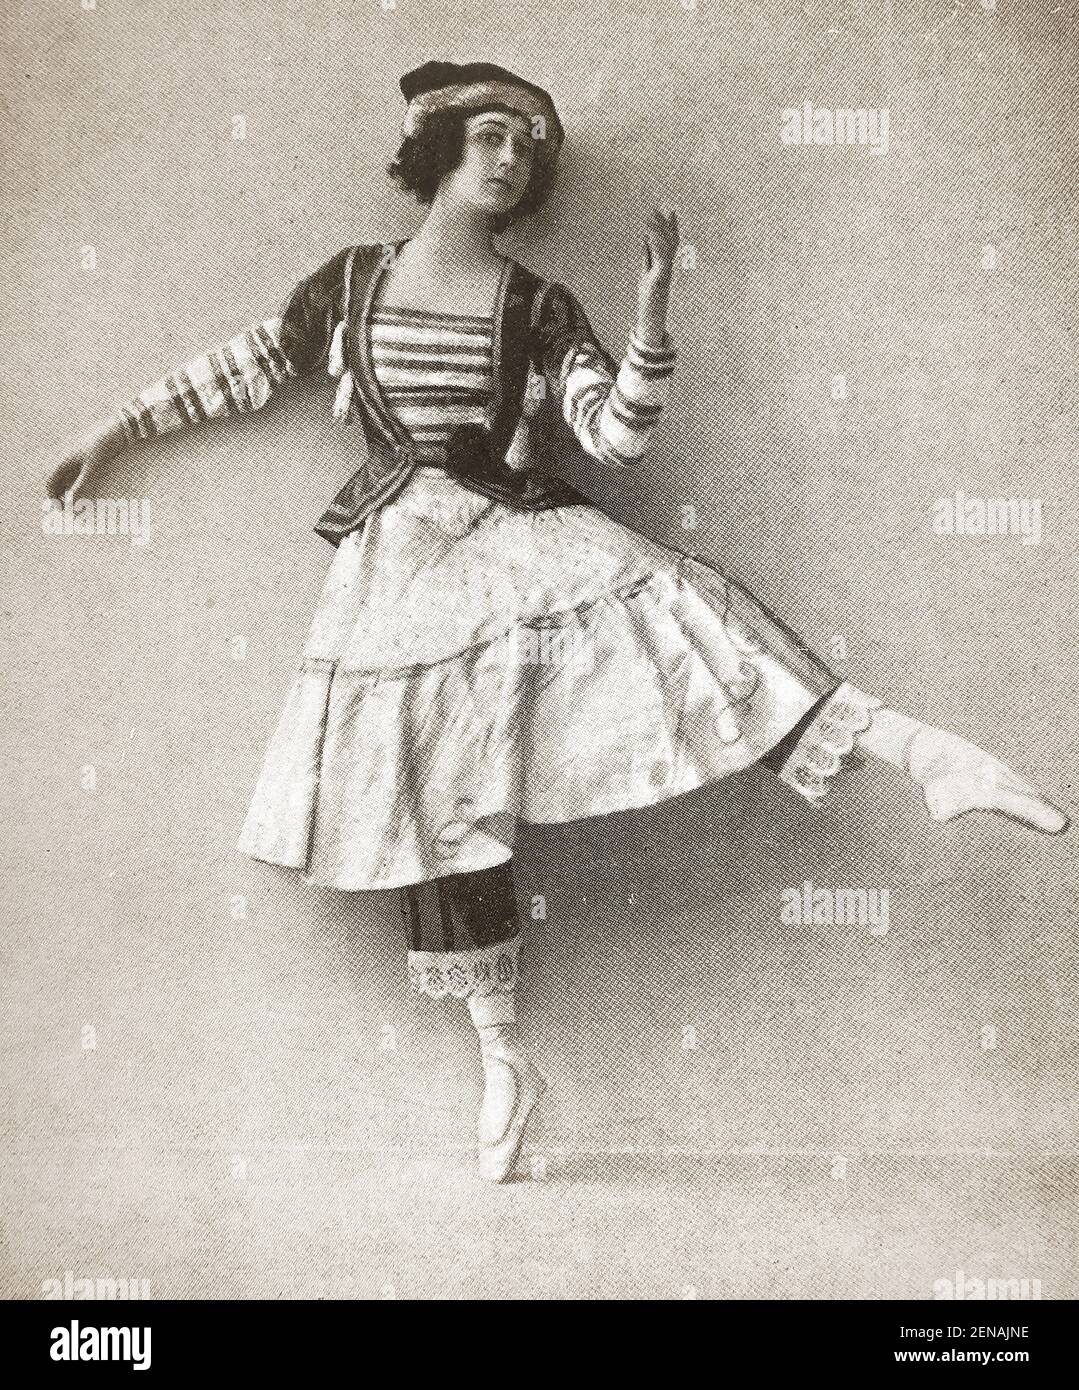 Russian Prima Ballerina Thamar Karsavina  aka Tamara Platonovna Karsavina( 1885 – 1978) in 'Petrouchka' (aka Petrushka) in 'Petrouchka'  (aka Petrushka) written by  Igor Stravinsky ). She was  principal artist of the Imperial Russian Ballet and later of the Ballets Russes. In Britain she assisted in the establishment of The Royal Ballet and was a founder member of the Royal Academy of Dance.  Her second husband was  British diplomat Henry James Bruce (1880–1951) the father of her son Nikita Stock Photo